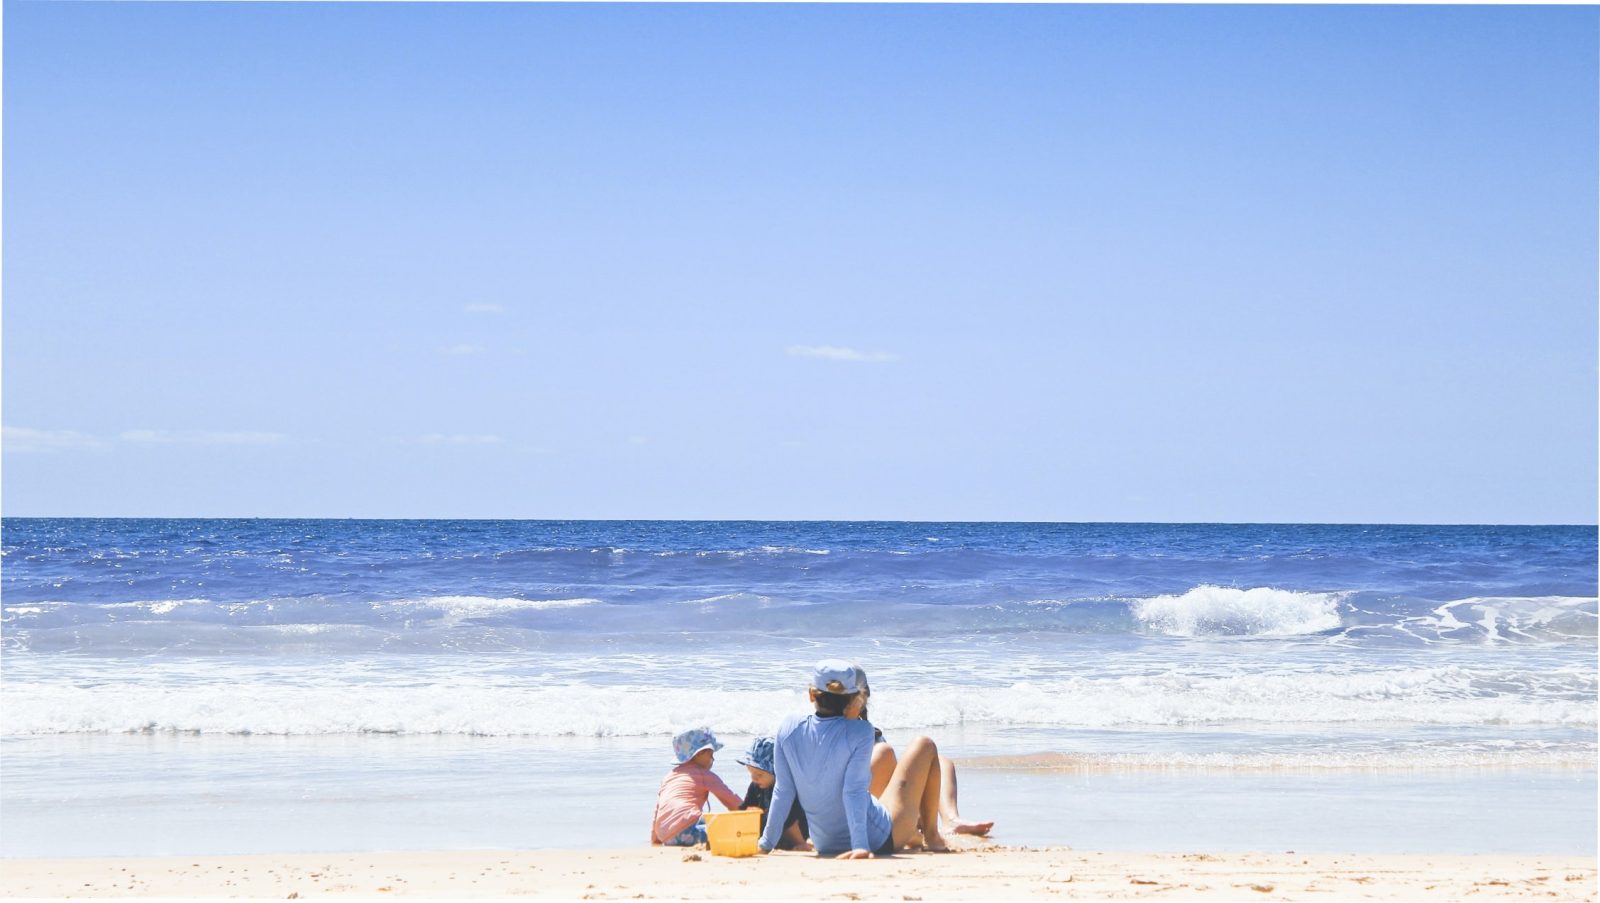 Two white children, wearing blue hats, and a white man, wearing a shirt and blue hat, both sitting on the sand in front of the sea